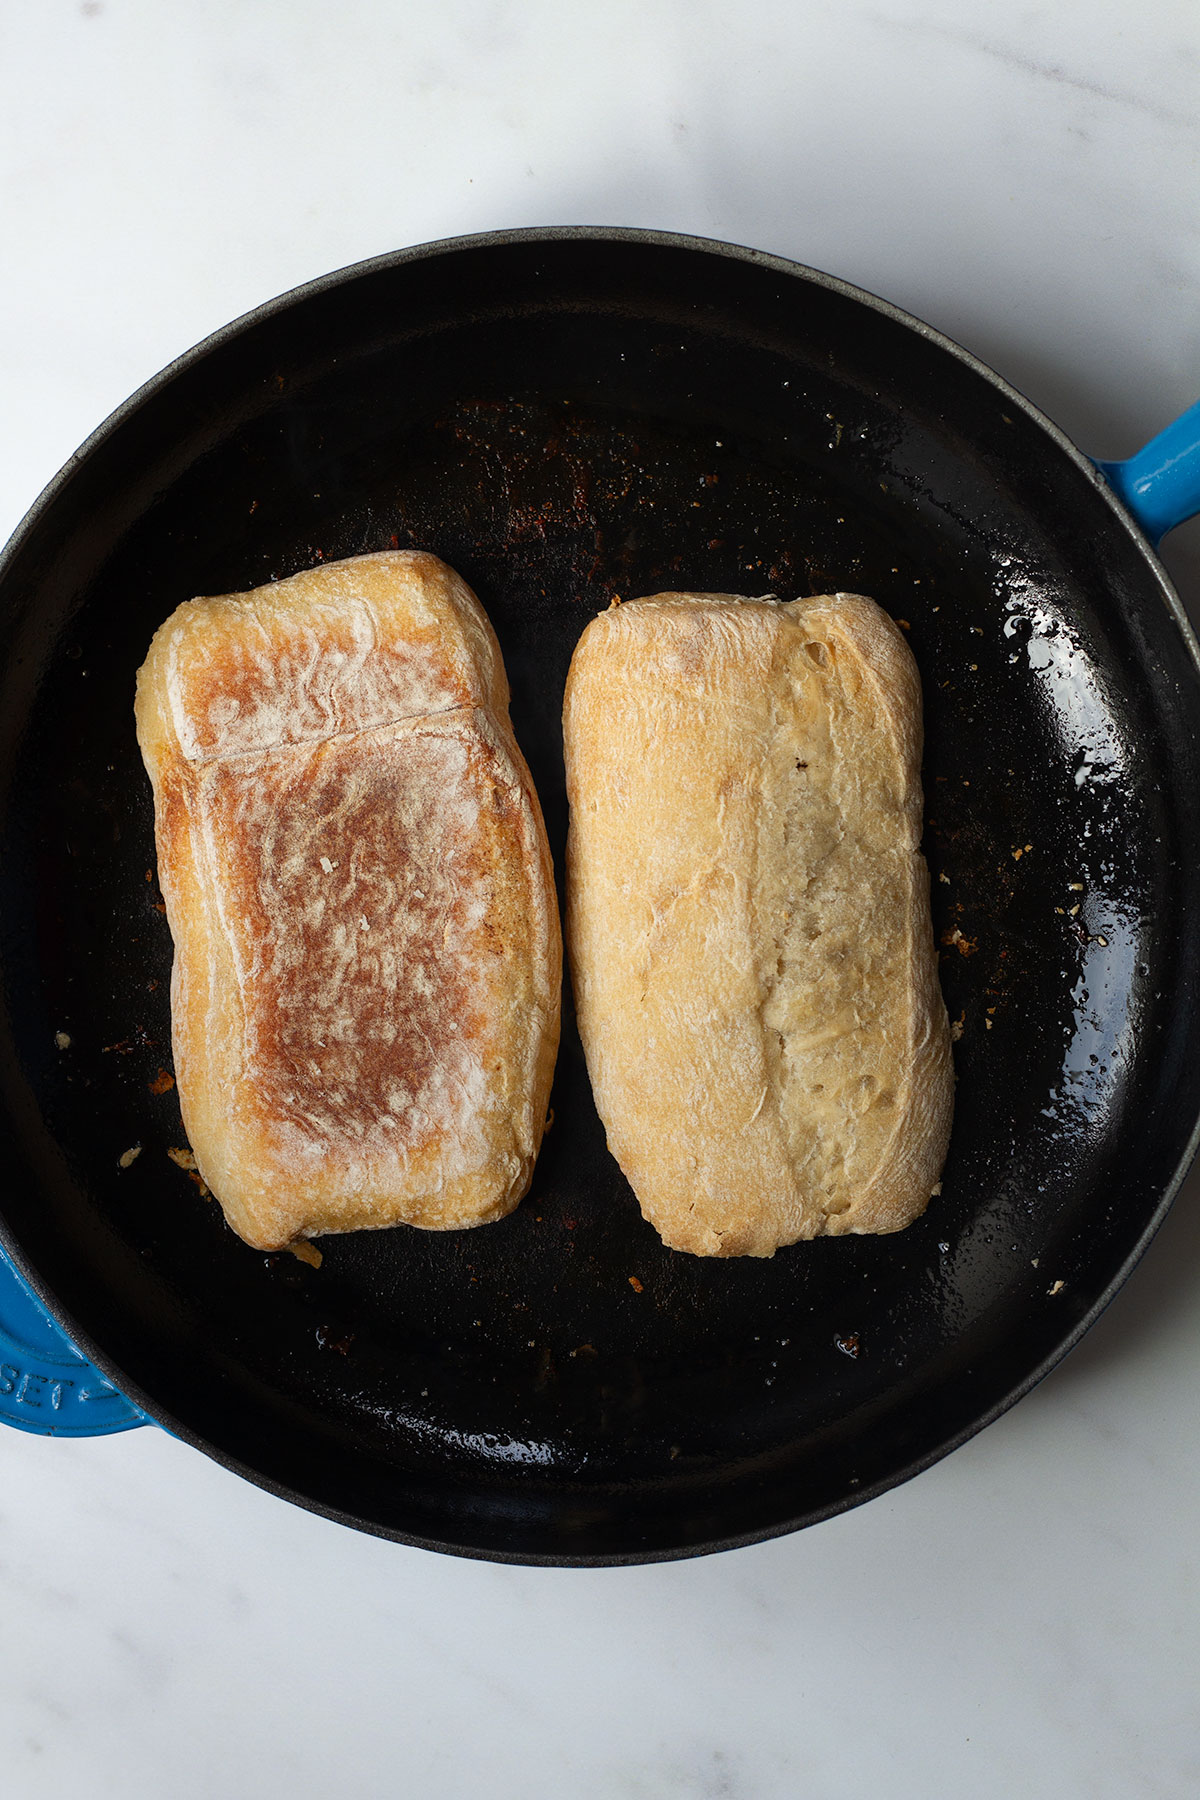 Toasting the sliced ciabatta rolls face-down in a dark coloured frying pan.